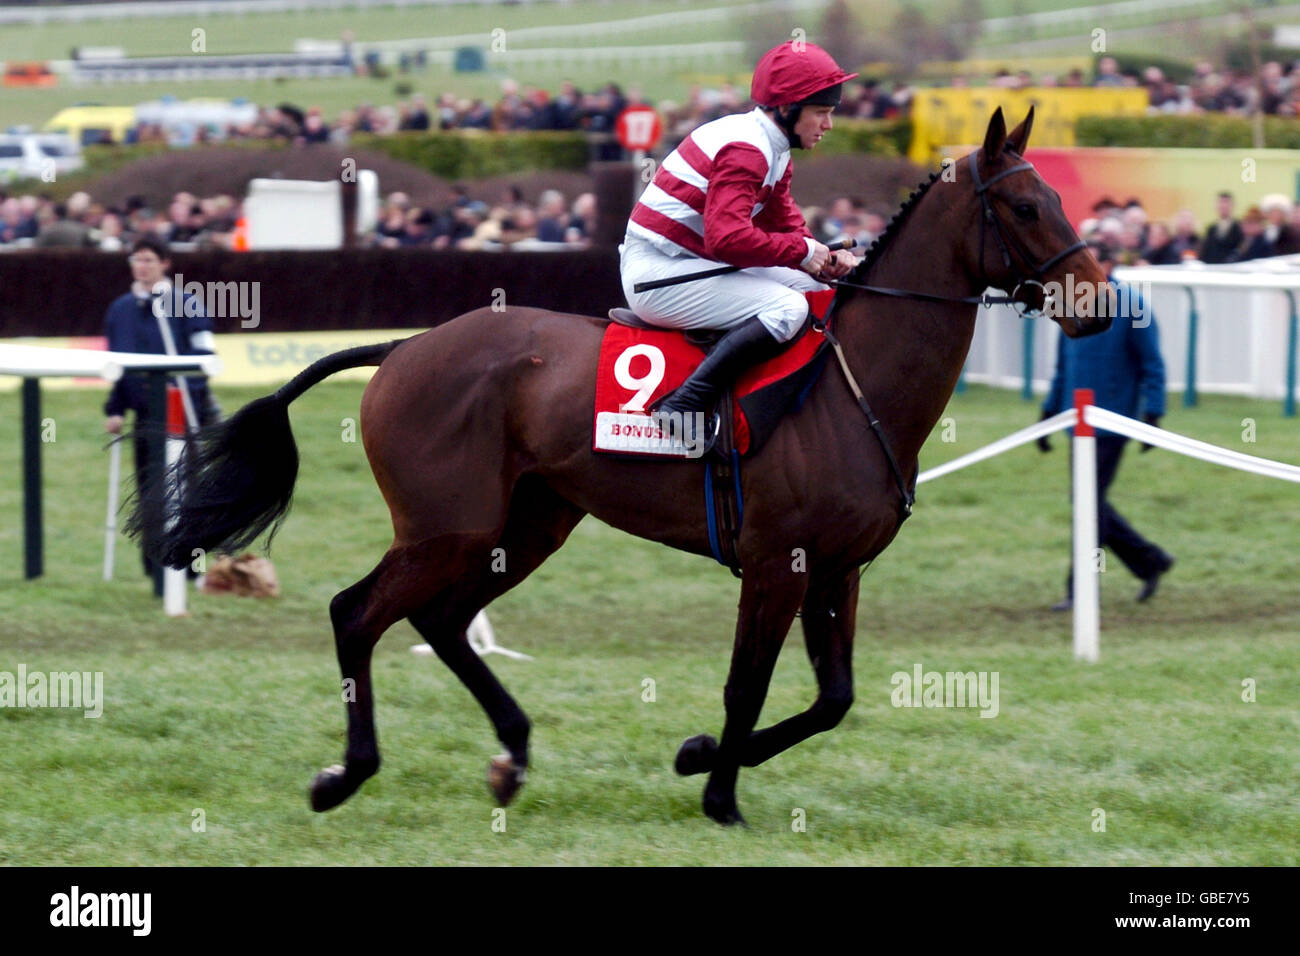 SH Boom ridden by Liam Cooper goes to post in The bonusprint.com Stayers' Hurdle Race Stock Photo